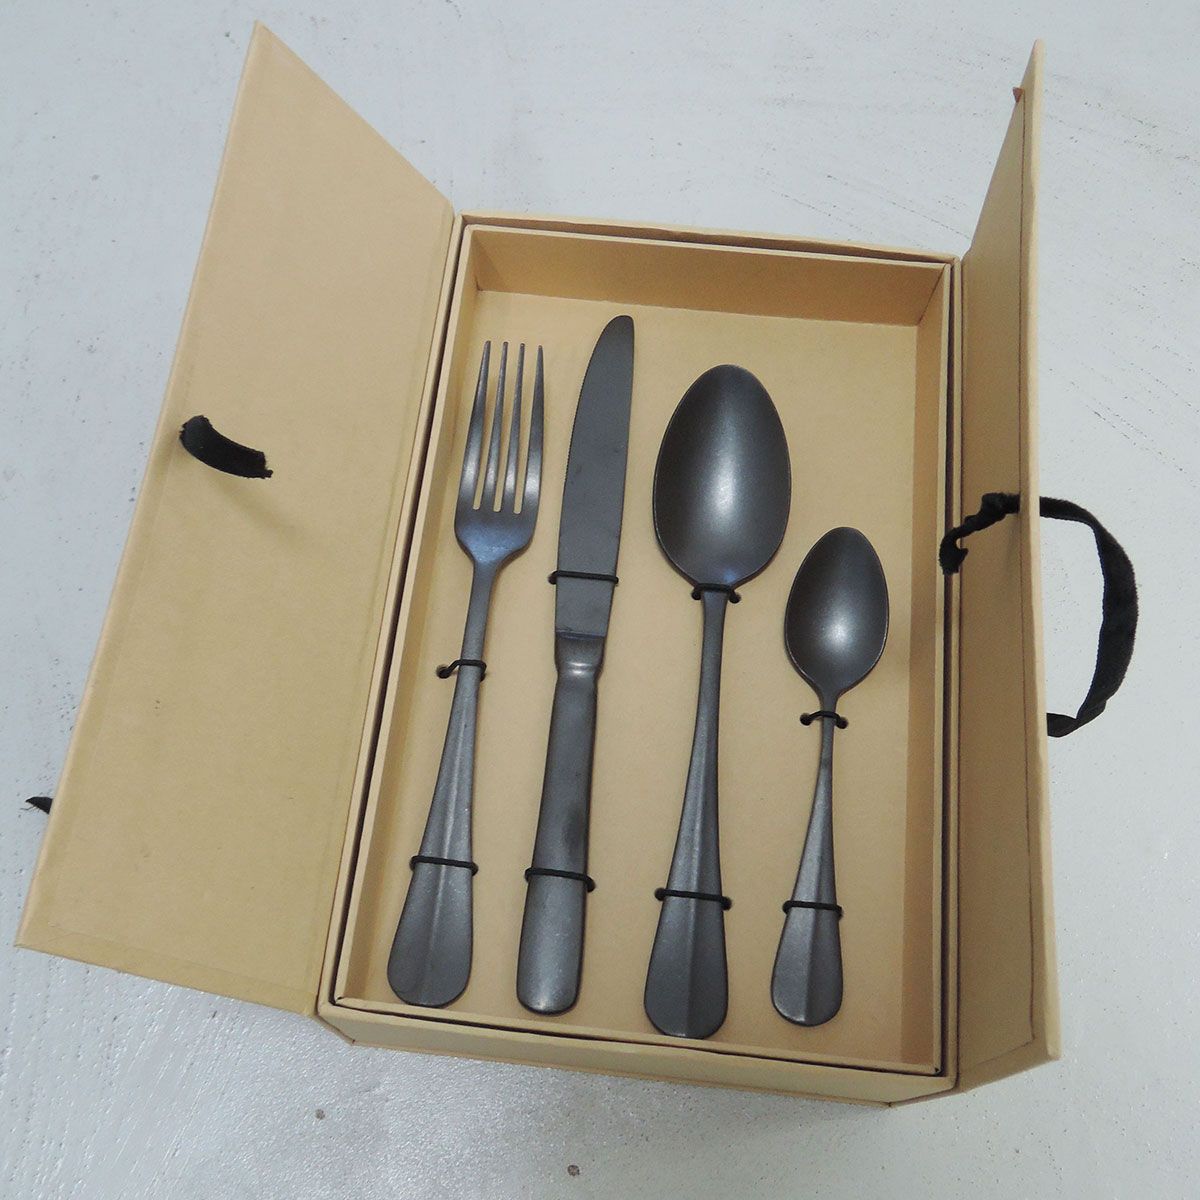 Cutlery set for 16 in brushed black stainless steel